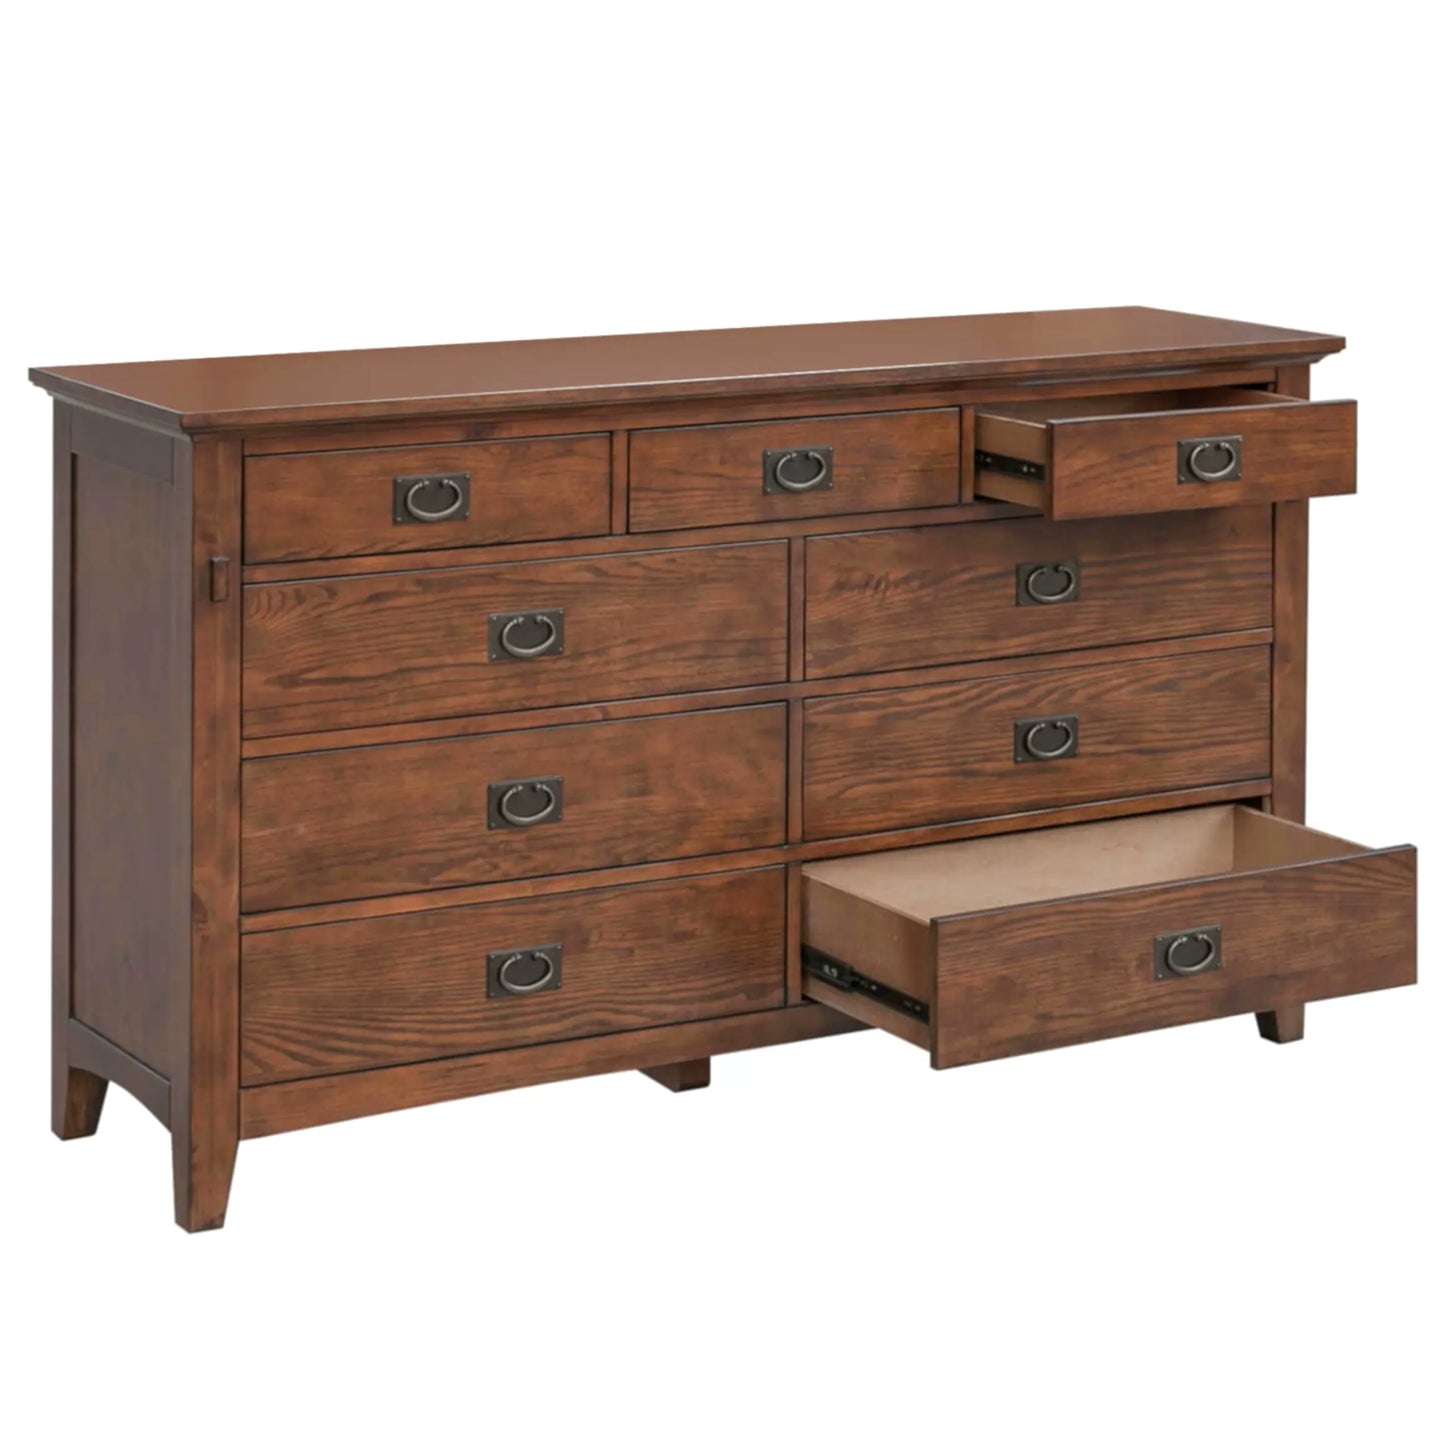 Sunset Trading Mission Bay 9 Drawer Double Bedroom Dresser | Amish Brown Solid Wood | Fully Assembled Furniture